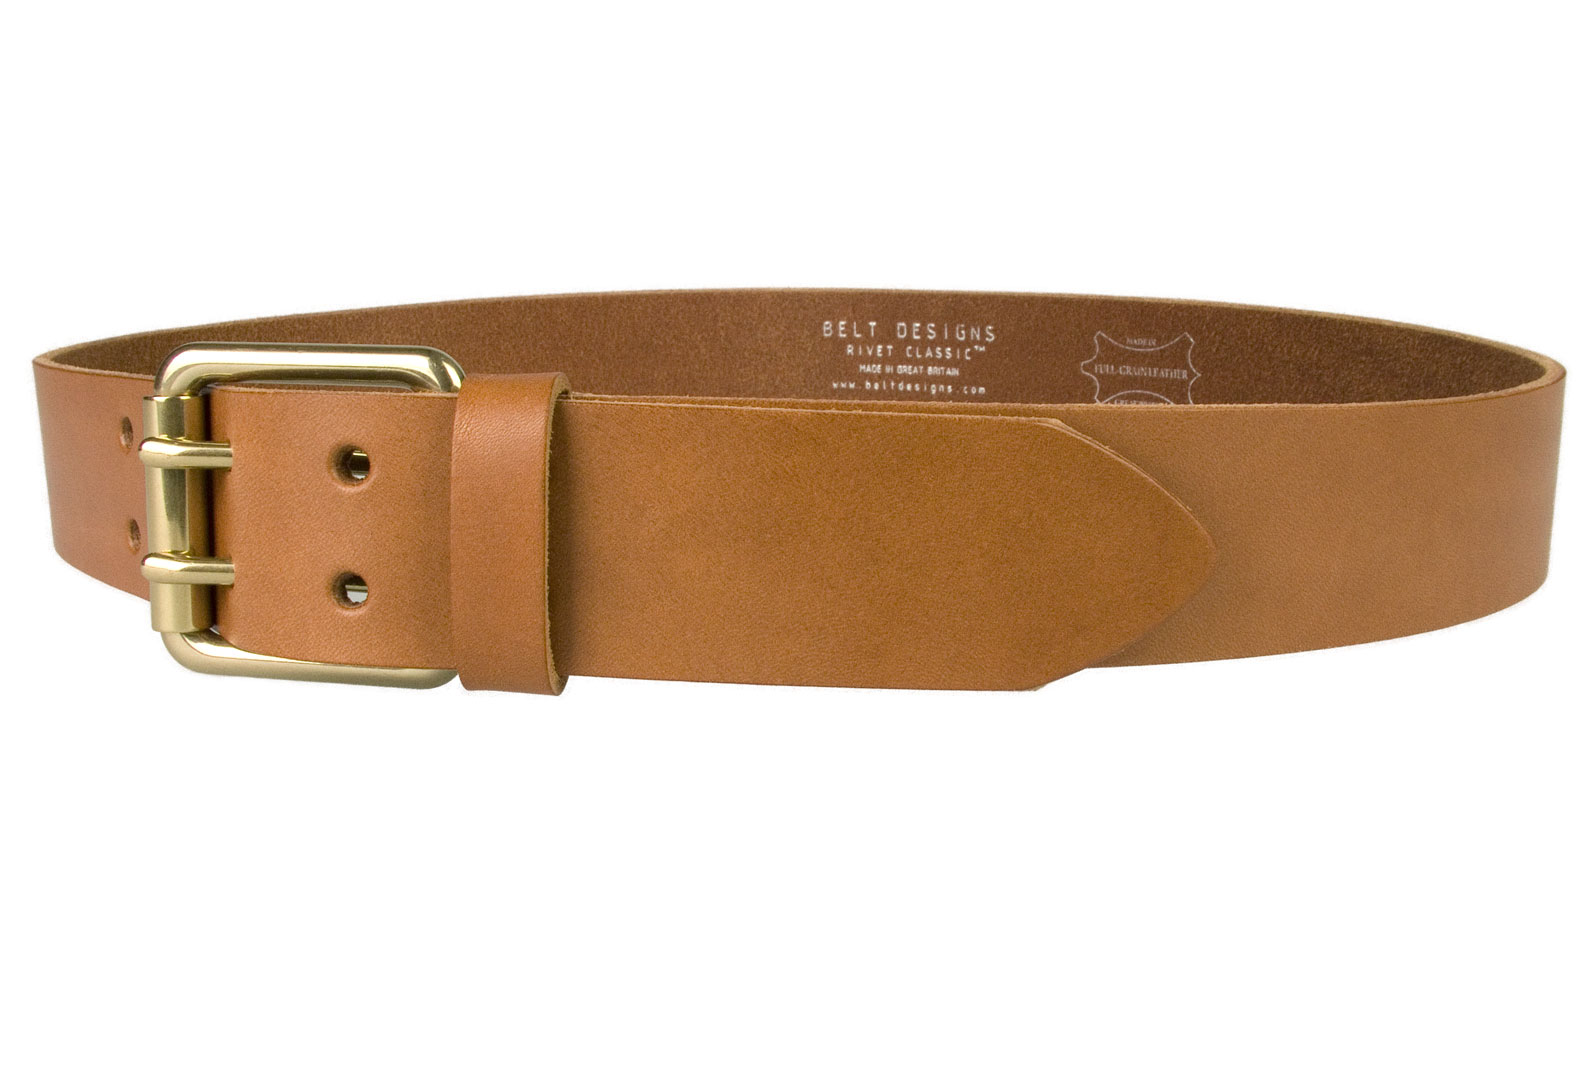 Light Tan Leather Jeans Belt With Solid Brass Buckle - BELT DESIGNS